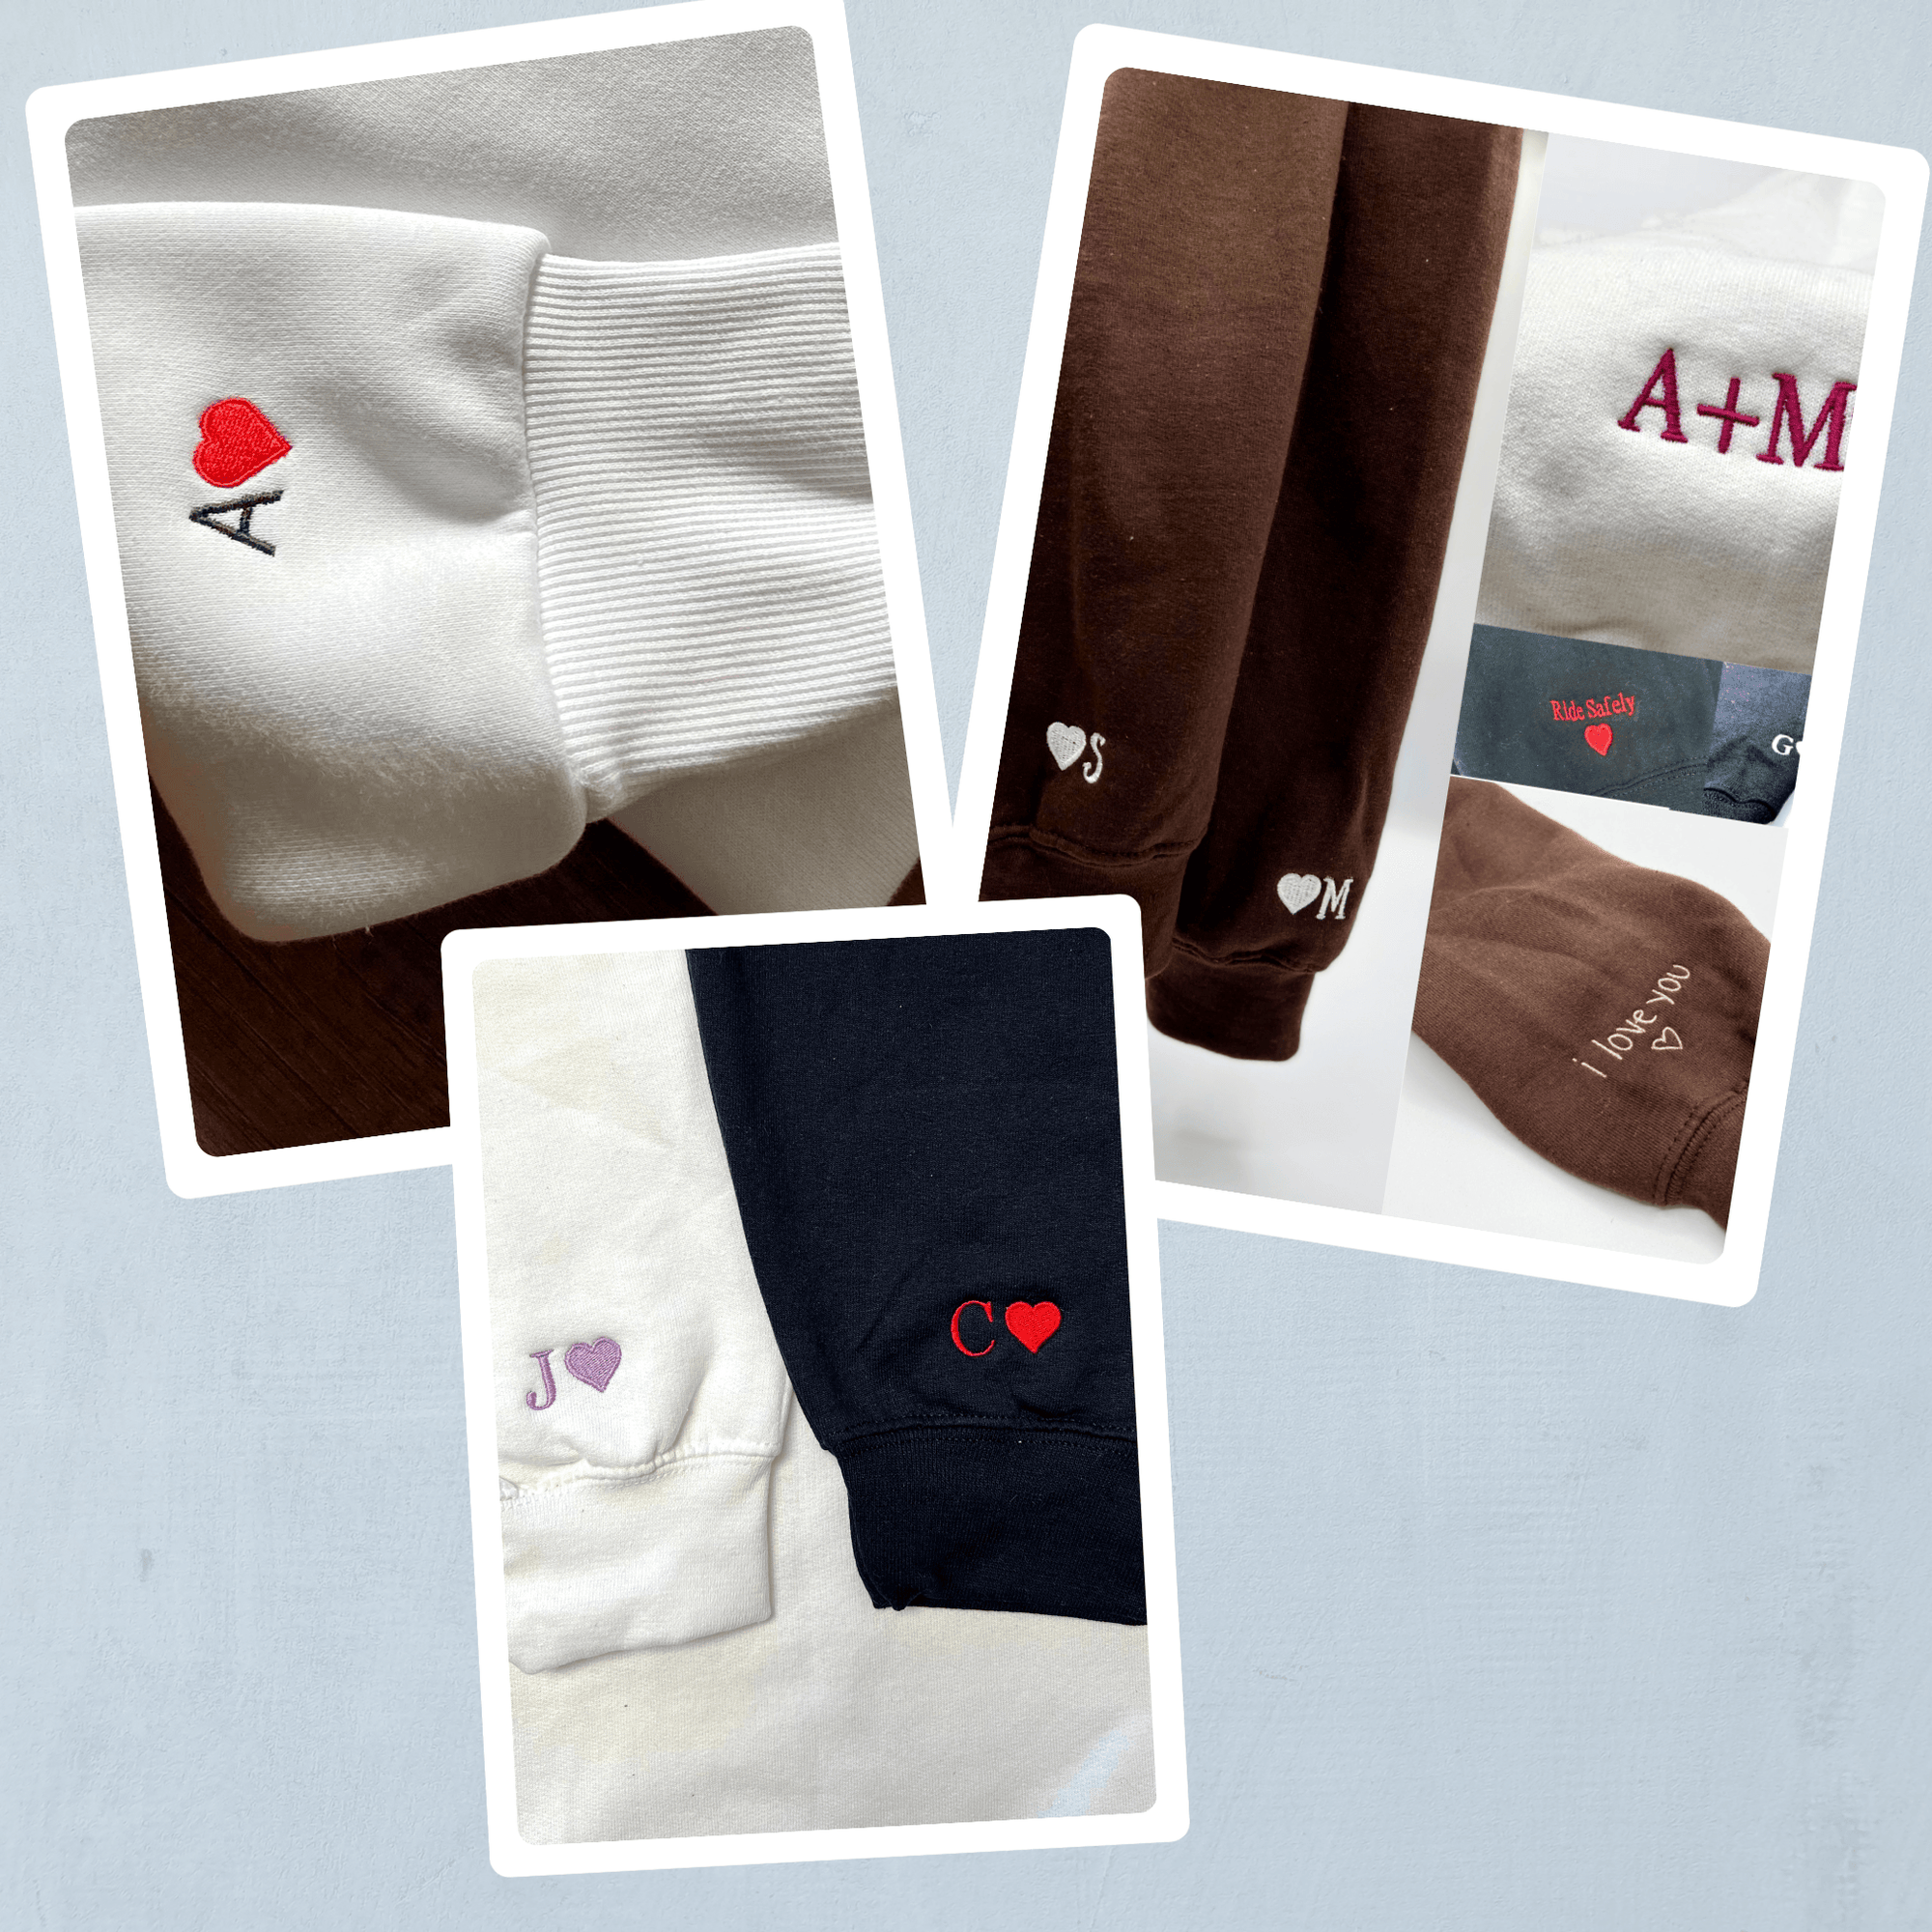 Custom Embroidered Roman Numeral Hoodies For Couples, Roman Numeral Date Hoodie, Cute Cartoon Anakin x Padme Couples Embroidered Hoodie